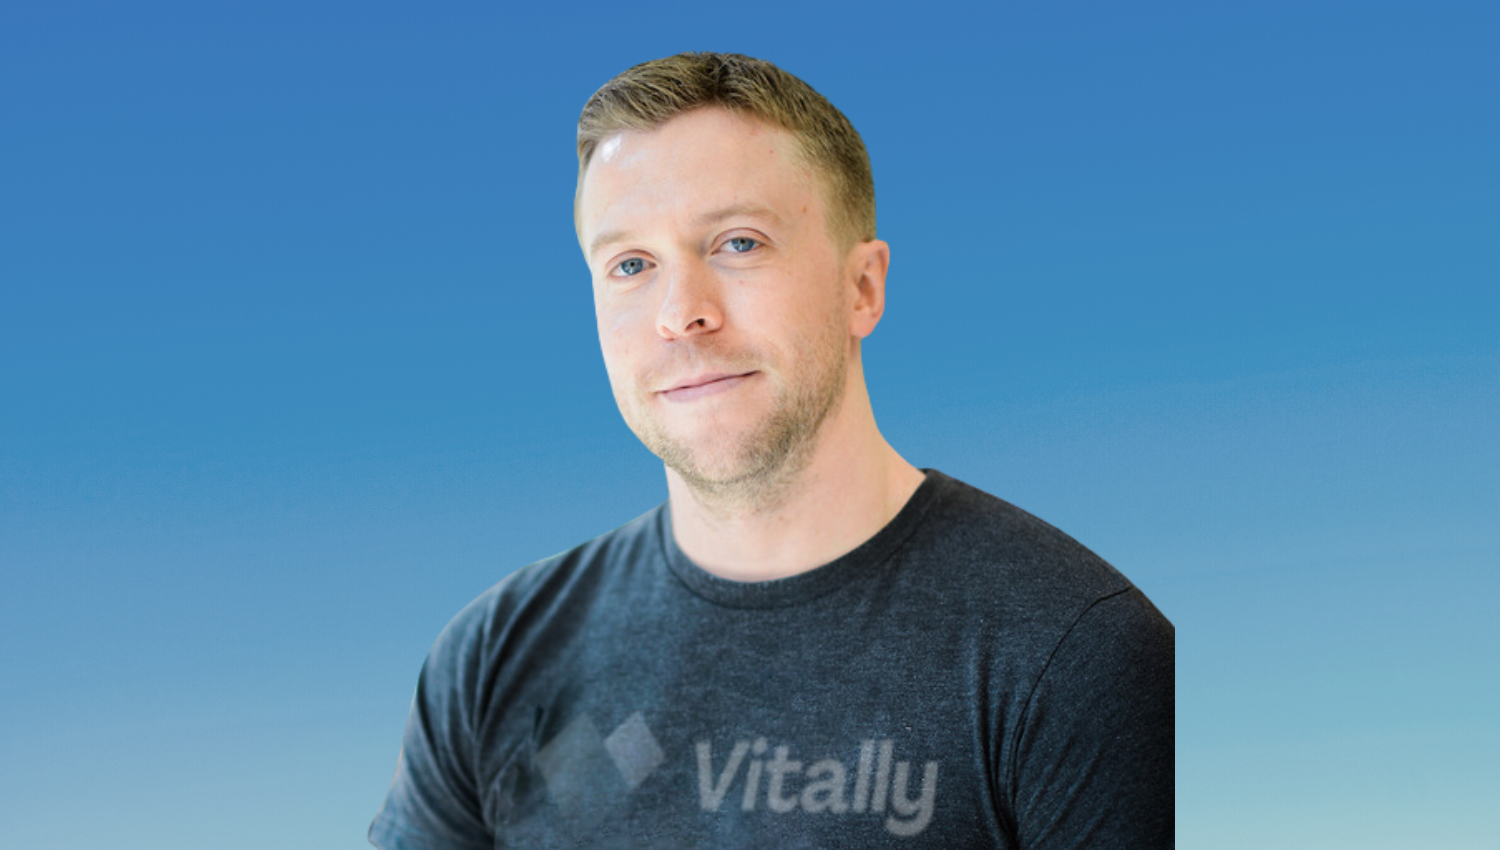 Vitally founder and CEO Jamie Davidson is pictured against a blue background.